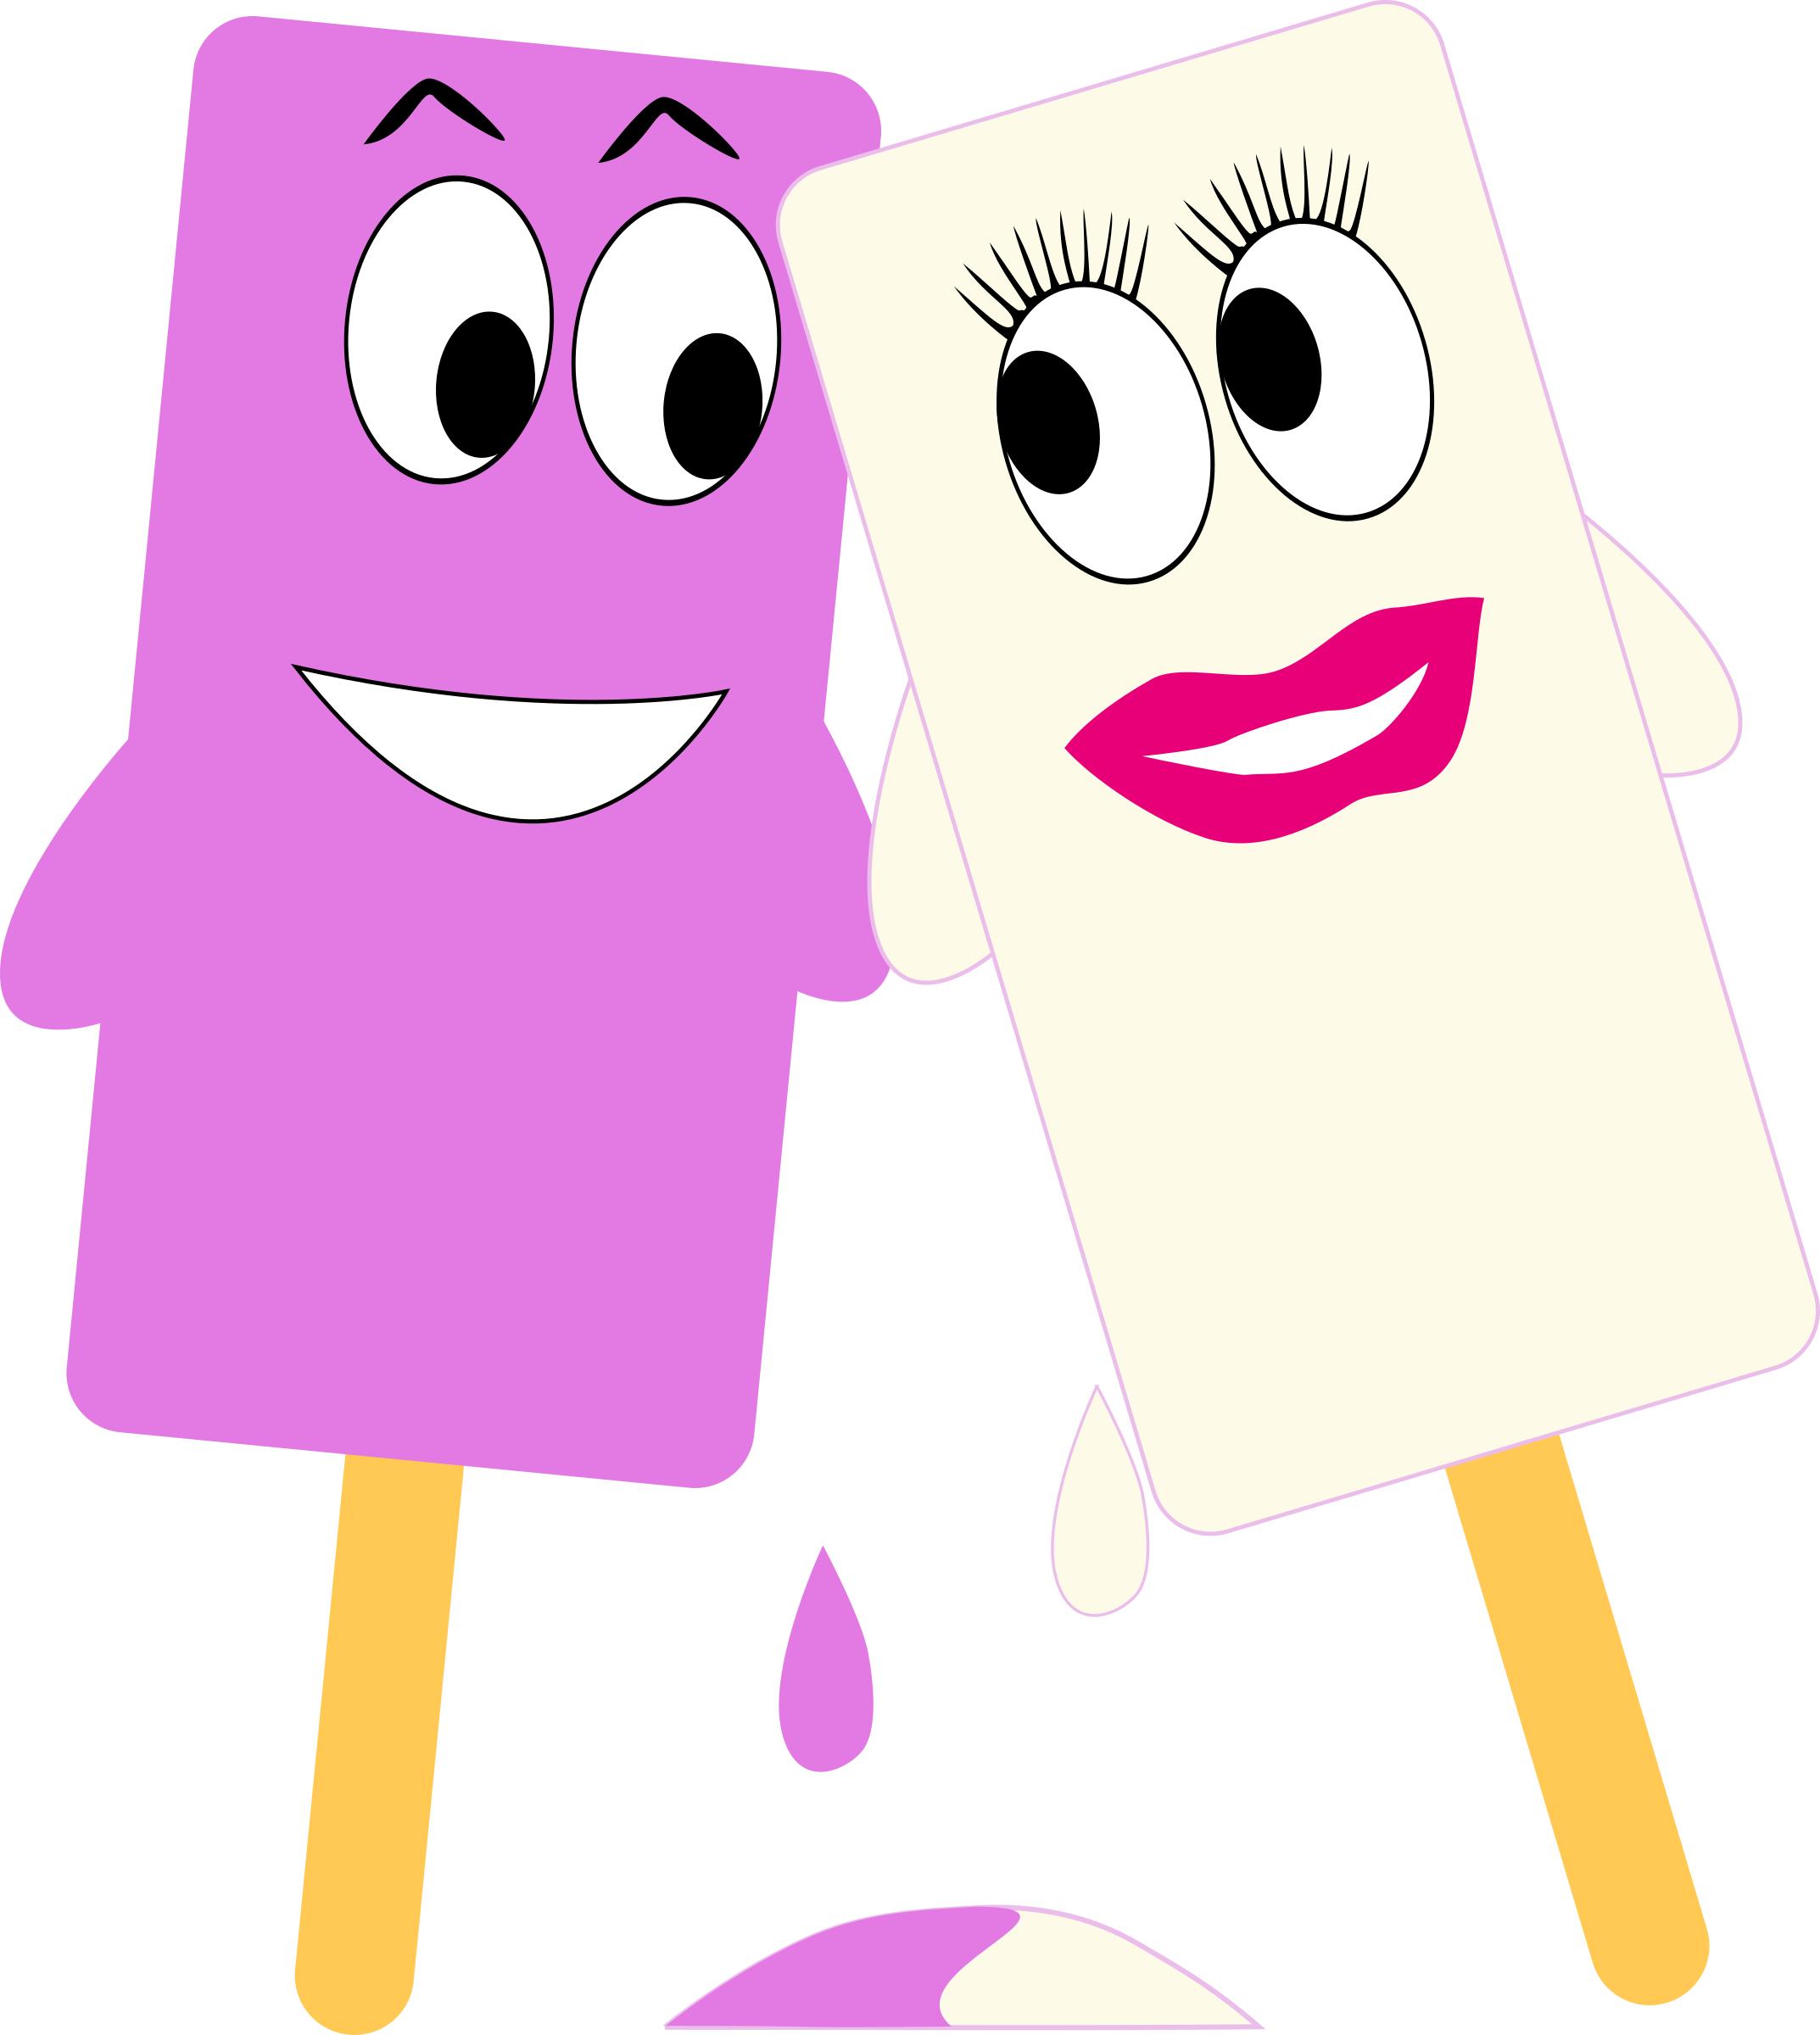 Ice cream girl and boy in love png